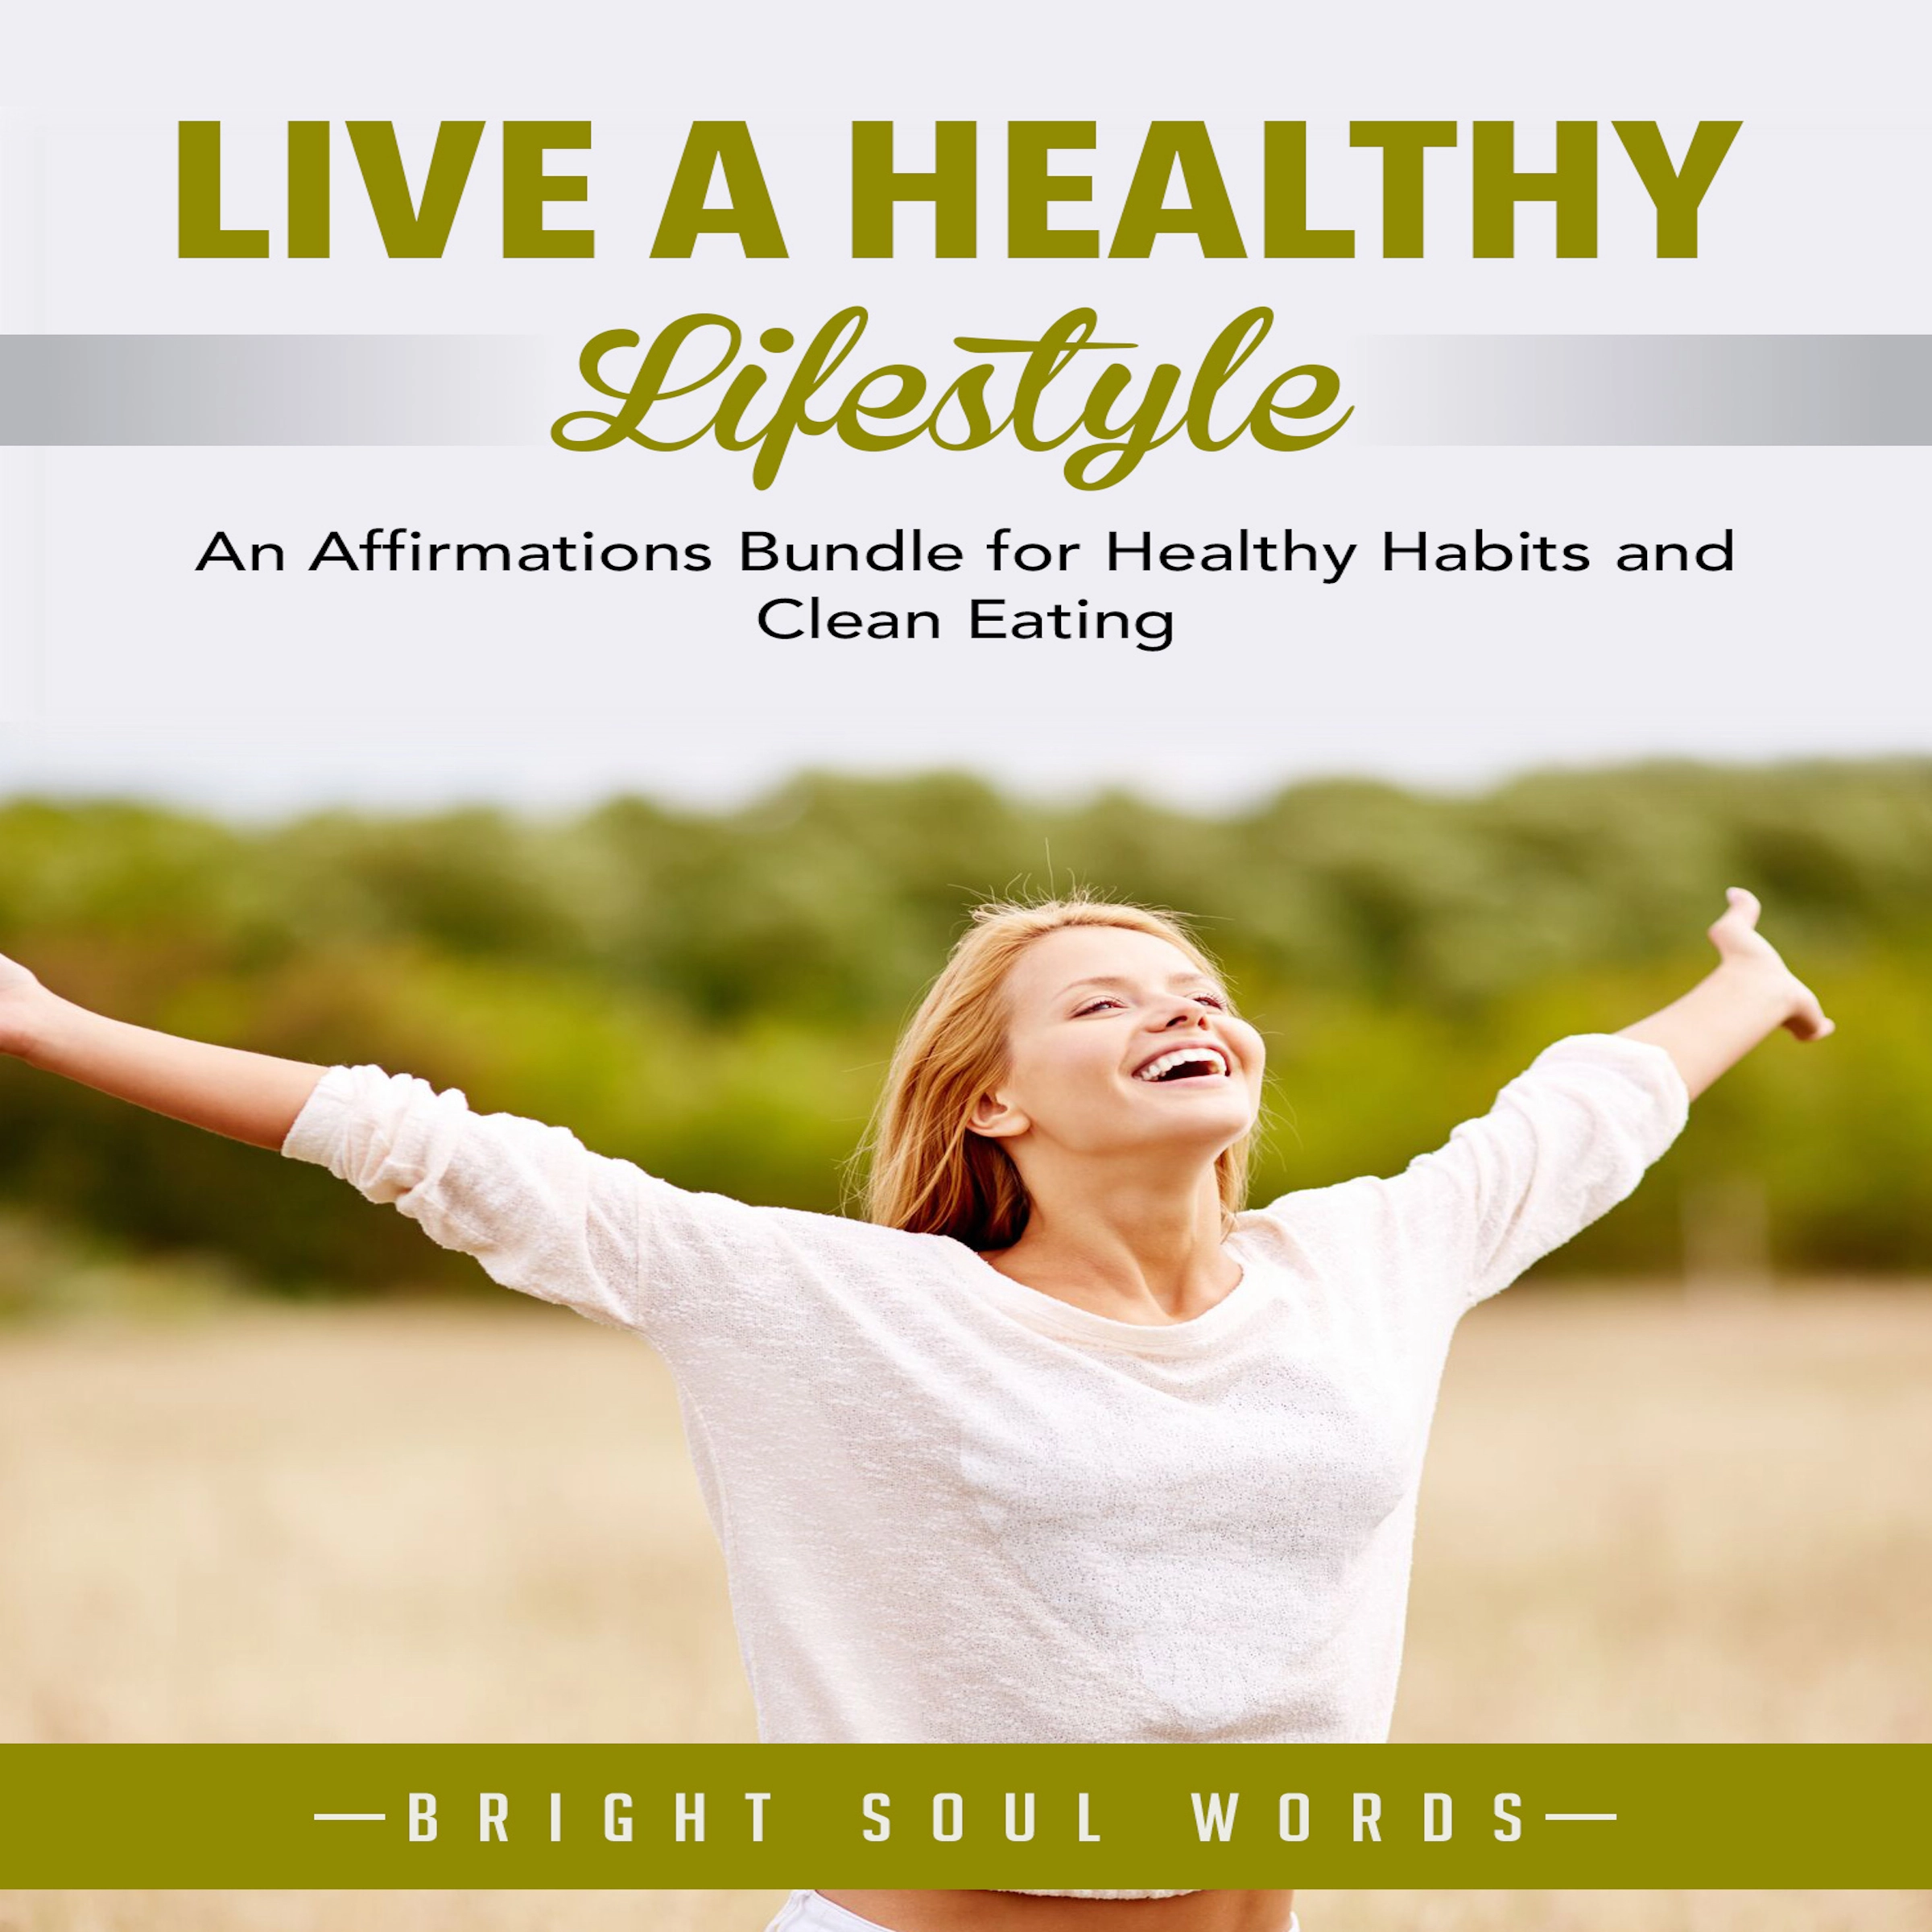 Live a Healthy Lifestyle: An Affirmations Bundle for Healthy Habits and Clean Eating Audiobook by Bright Soul Words